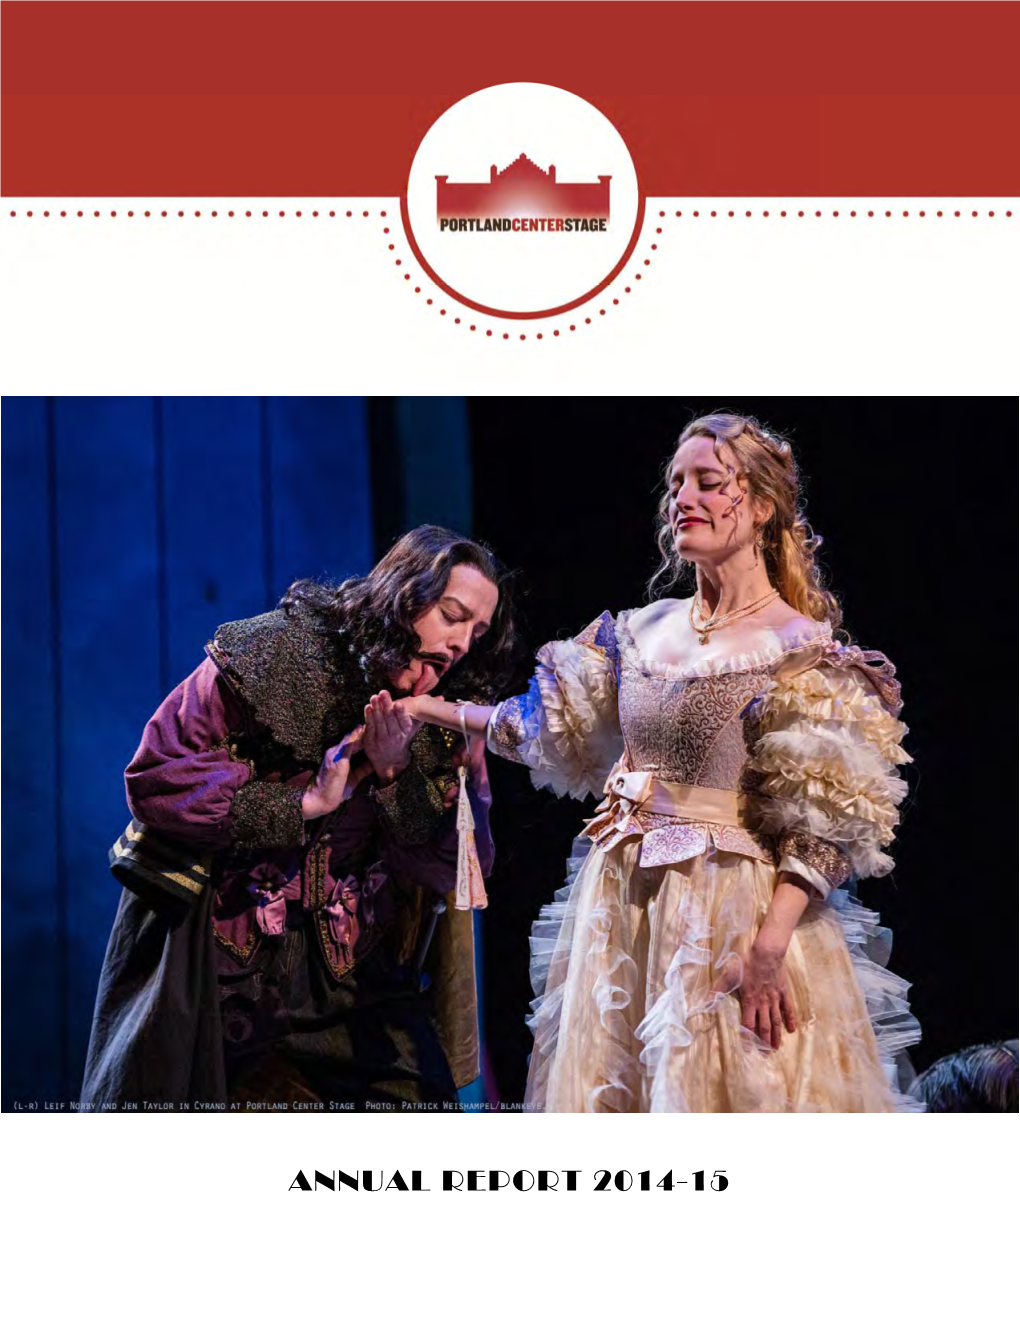 ANNUAL REPORT 2014-15 2014/15 Season 2013/14 SEASON During 2014/15, Portland Center Stage Served More Than 154,000 People, Including Nearly 123,000 Playgoers